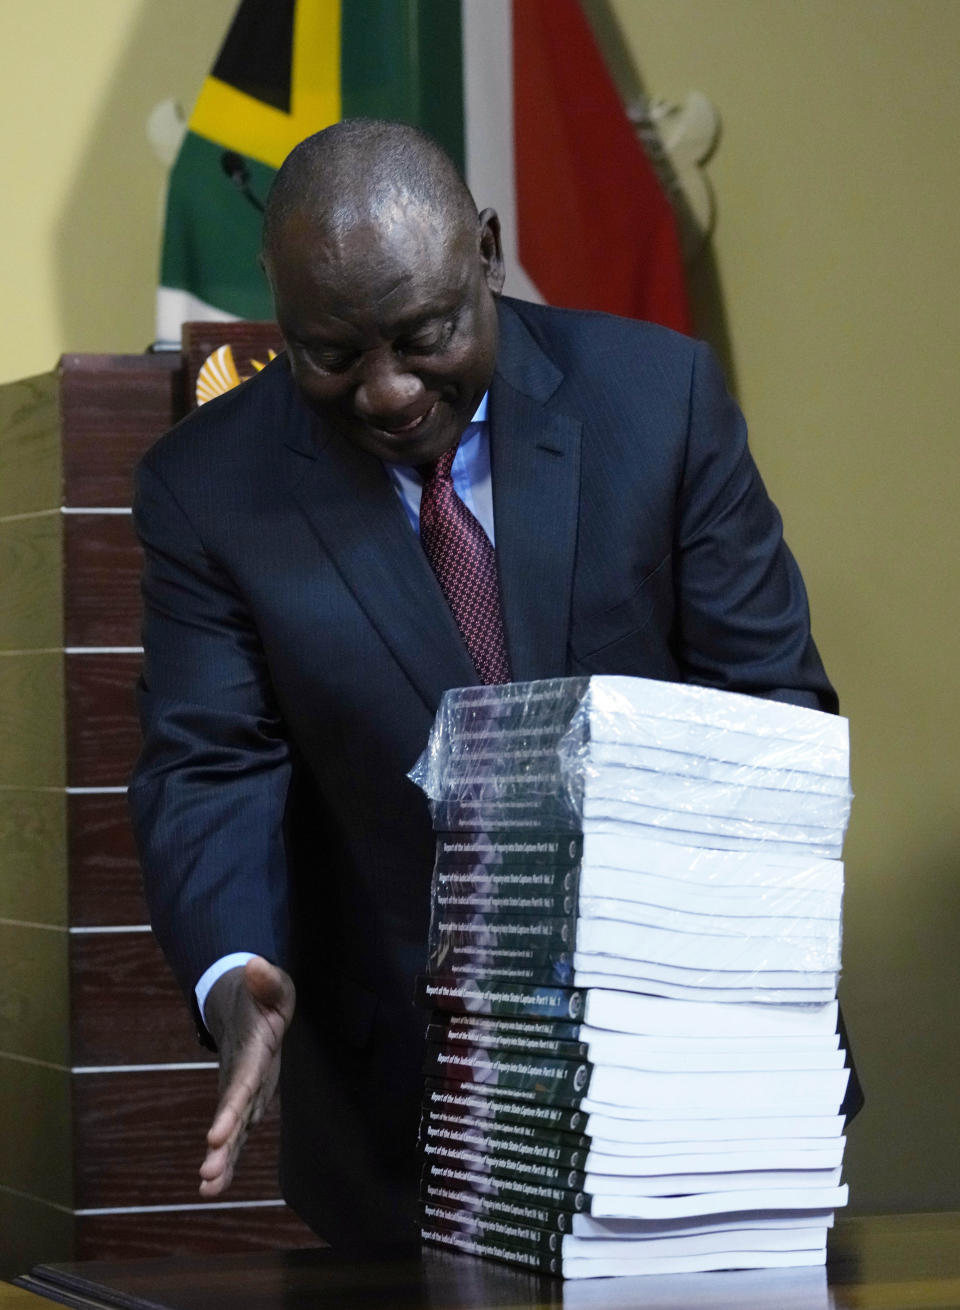 South Africa's President Cyril Ramaphosa receives the final report of a judicial investigation into corruption from Chief Justice Raymond Zondo at Union Building in Pretoria, South Africa, Wednesday, June 22, 2022.The probe has laid bare the rampant corruption in government and state-owned companies during former President Jacob Zuma’s tenure from 2009 to 2018. (AP Photo/Themba Hadebe)